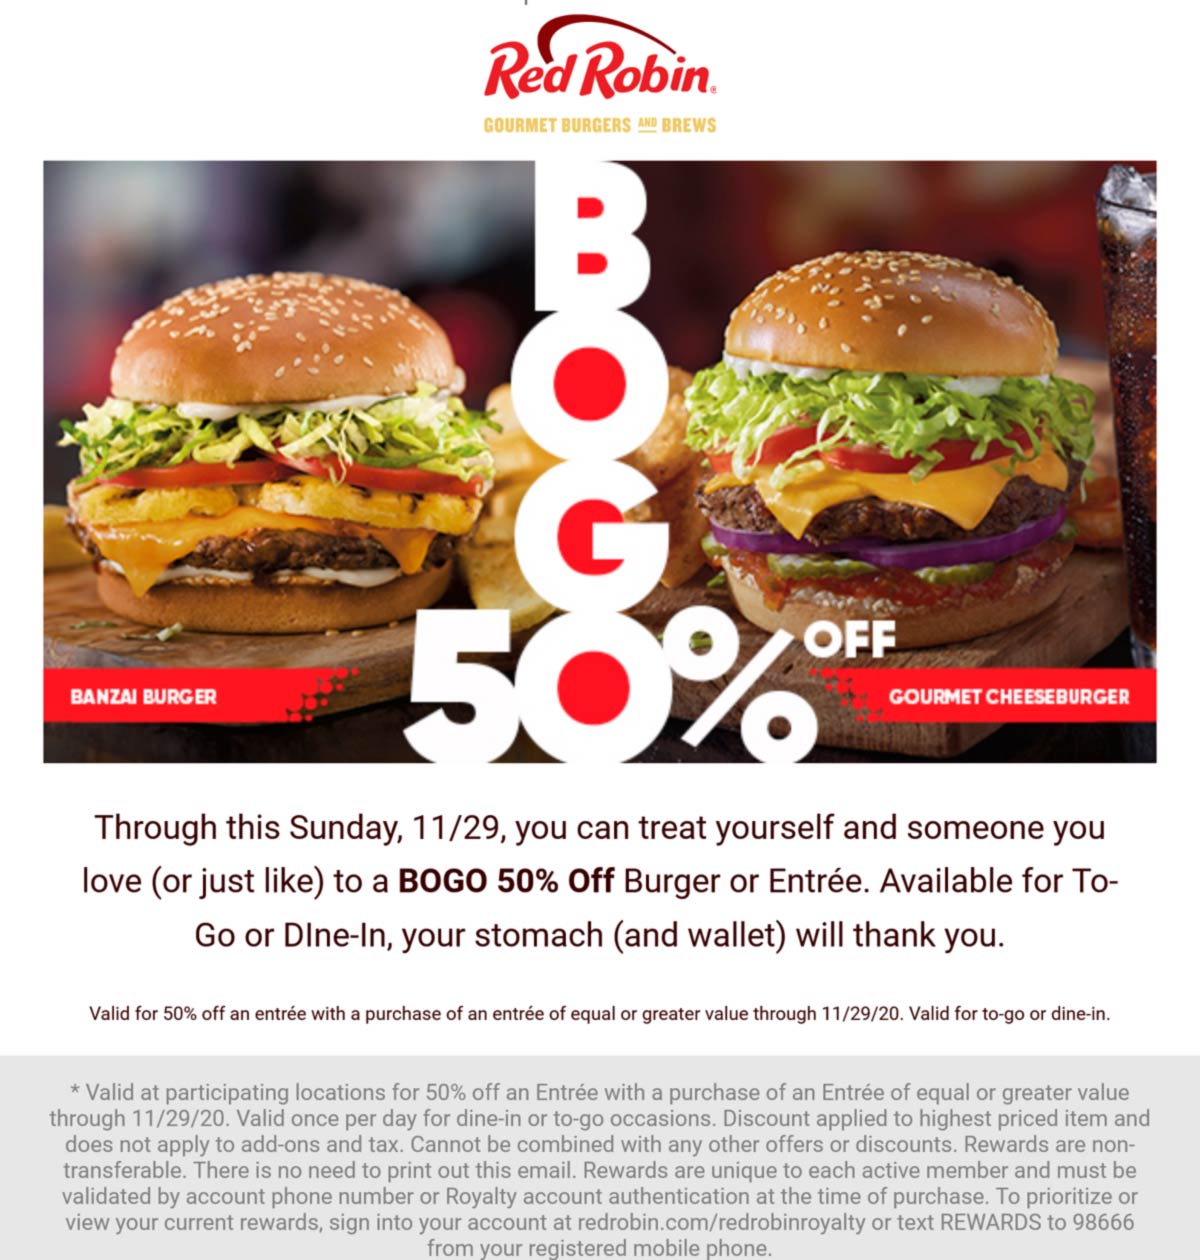 Red Robin restaurants Coupon  Second entree or cheeseburger 50% off for loyalty peeps at Red Robin #redrobin 